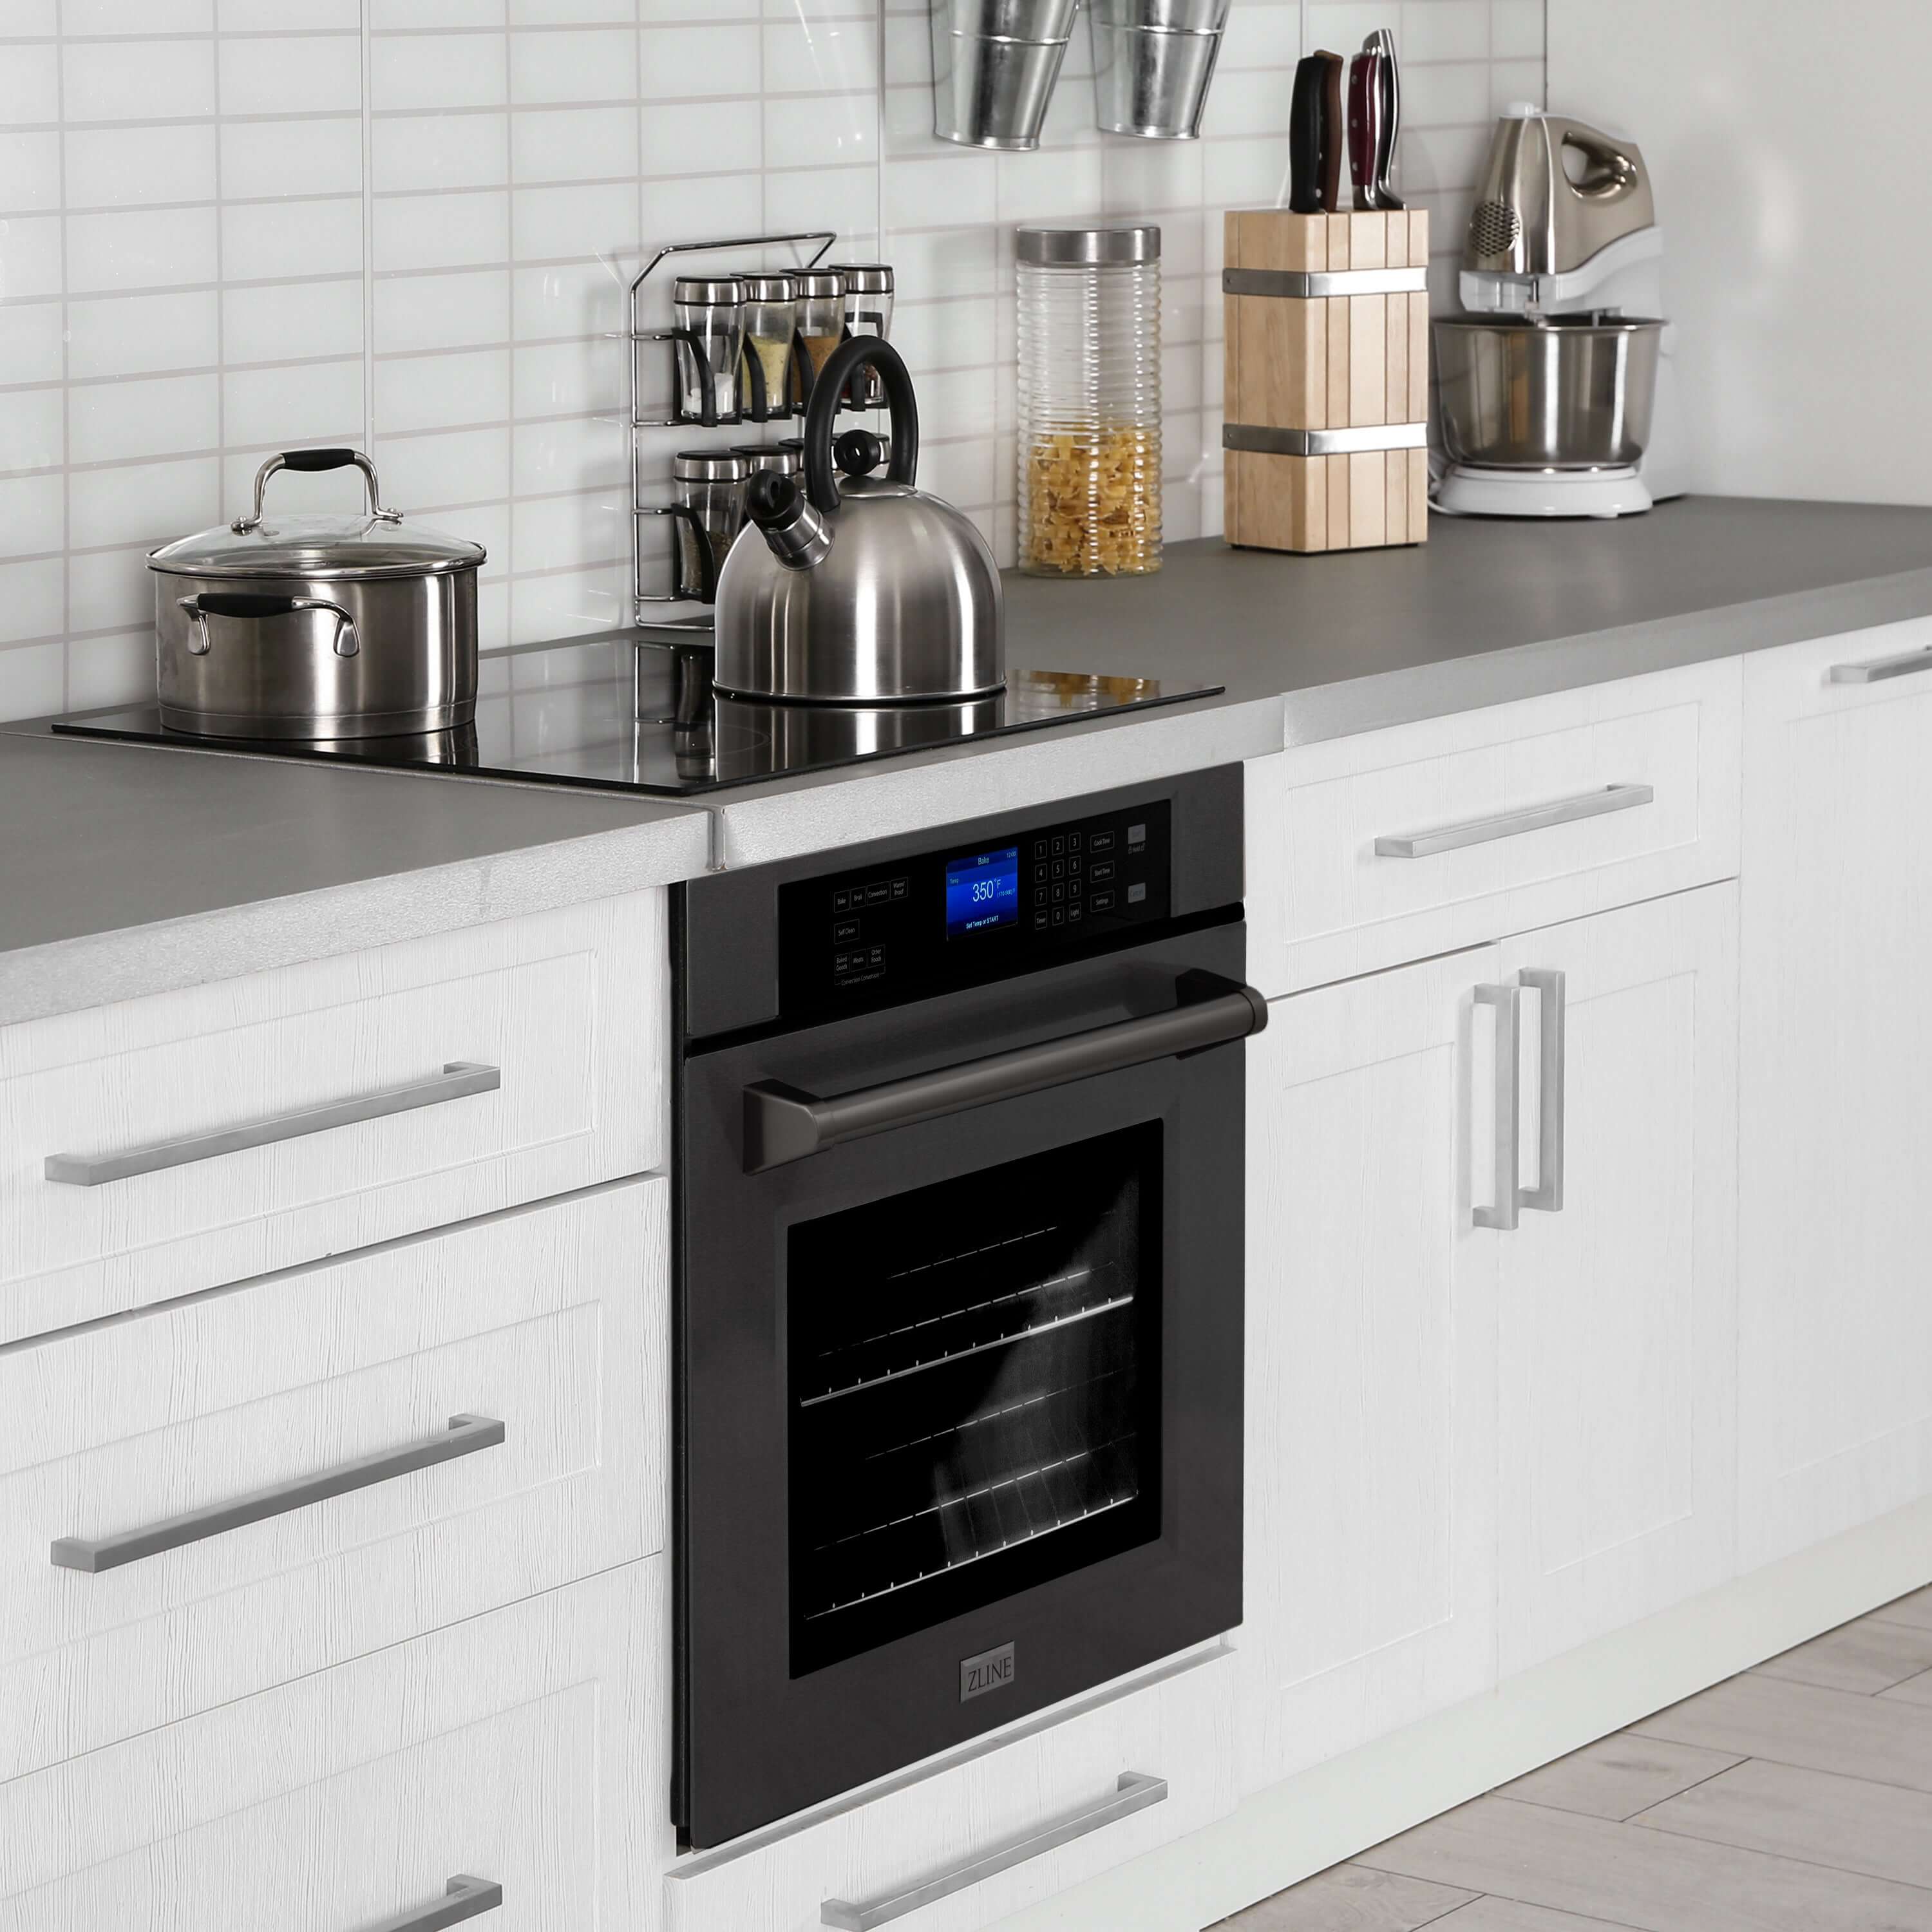 ZLINE Wall Oven built-in to cabinets below cooktop in a cottage-style kitchen.